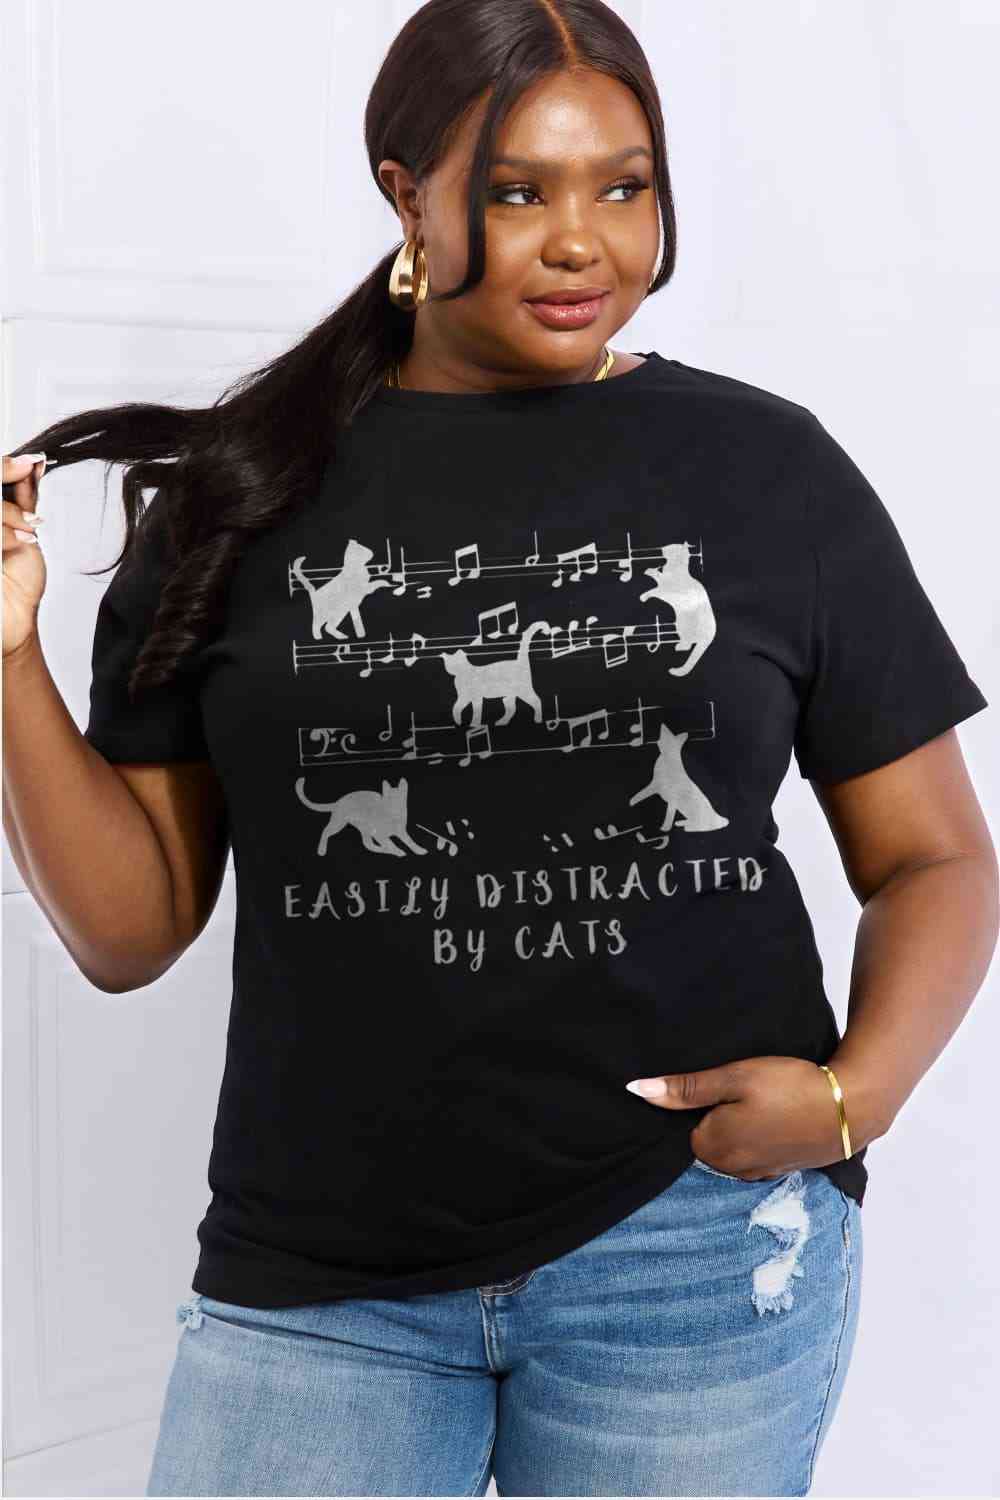 EASILY DISTRACTED BY CATS Graphic Cotton Tee - T-Shirts - Shirts & Tops - 8 - 2024